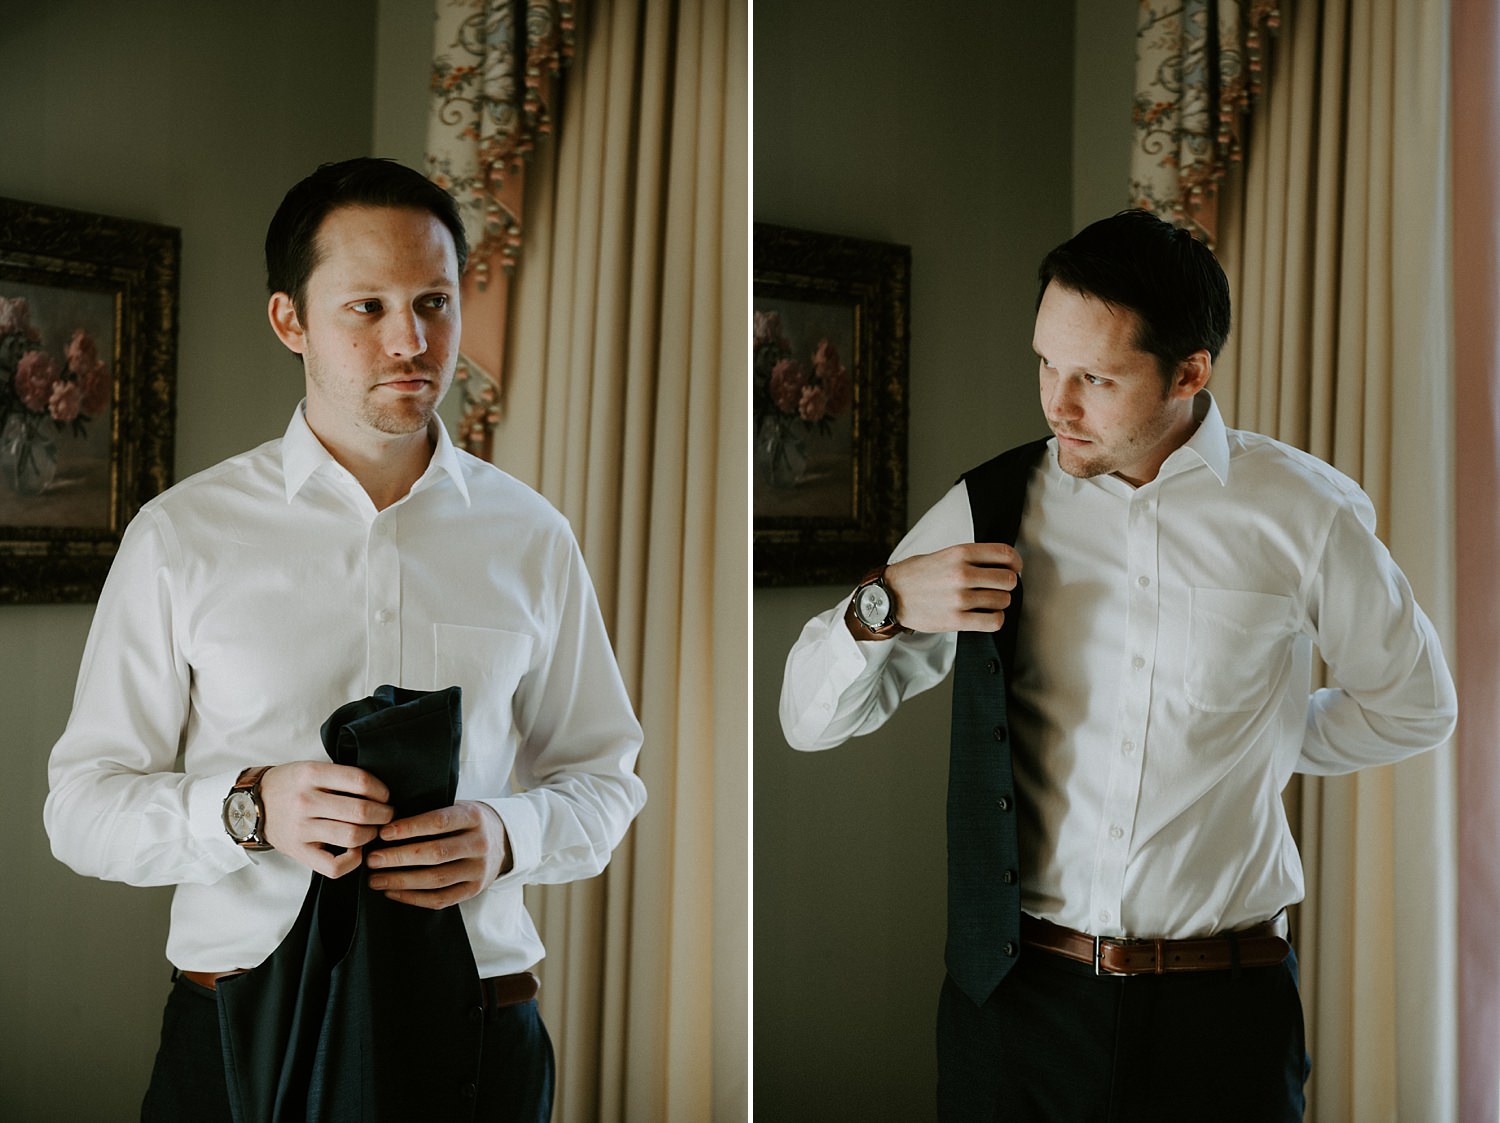 Groom getting ready on wedding day at The Webb Barn in Wethersfield, CT